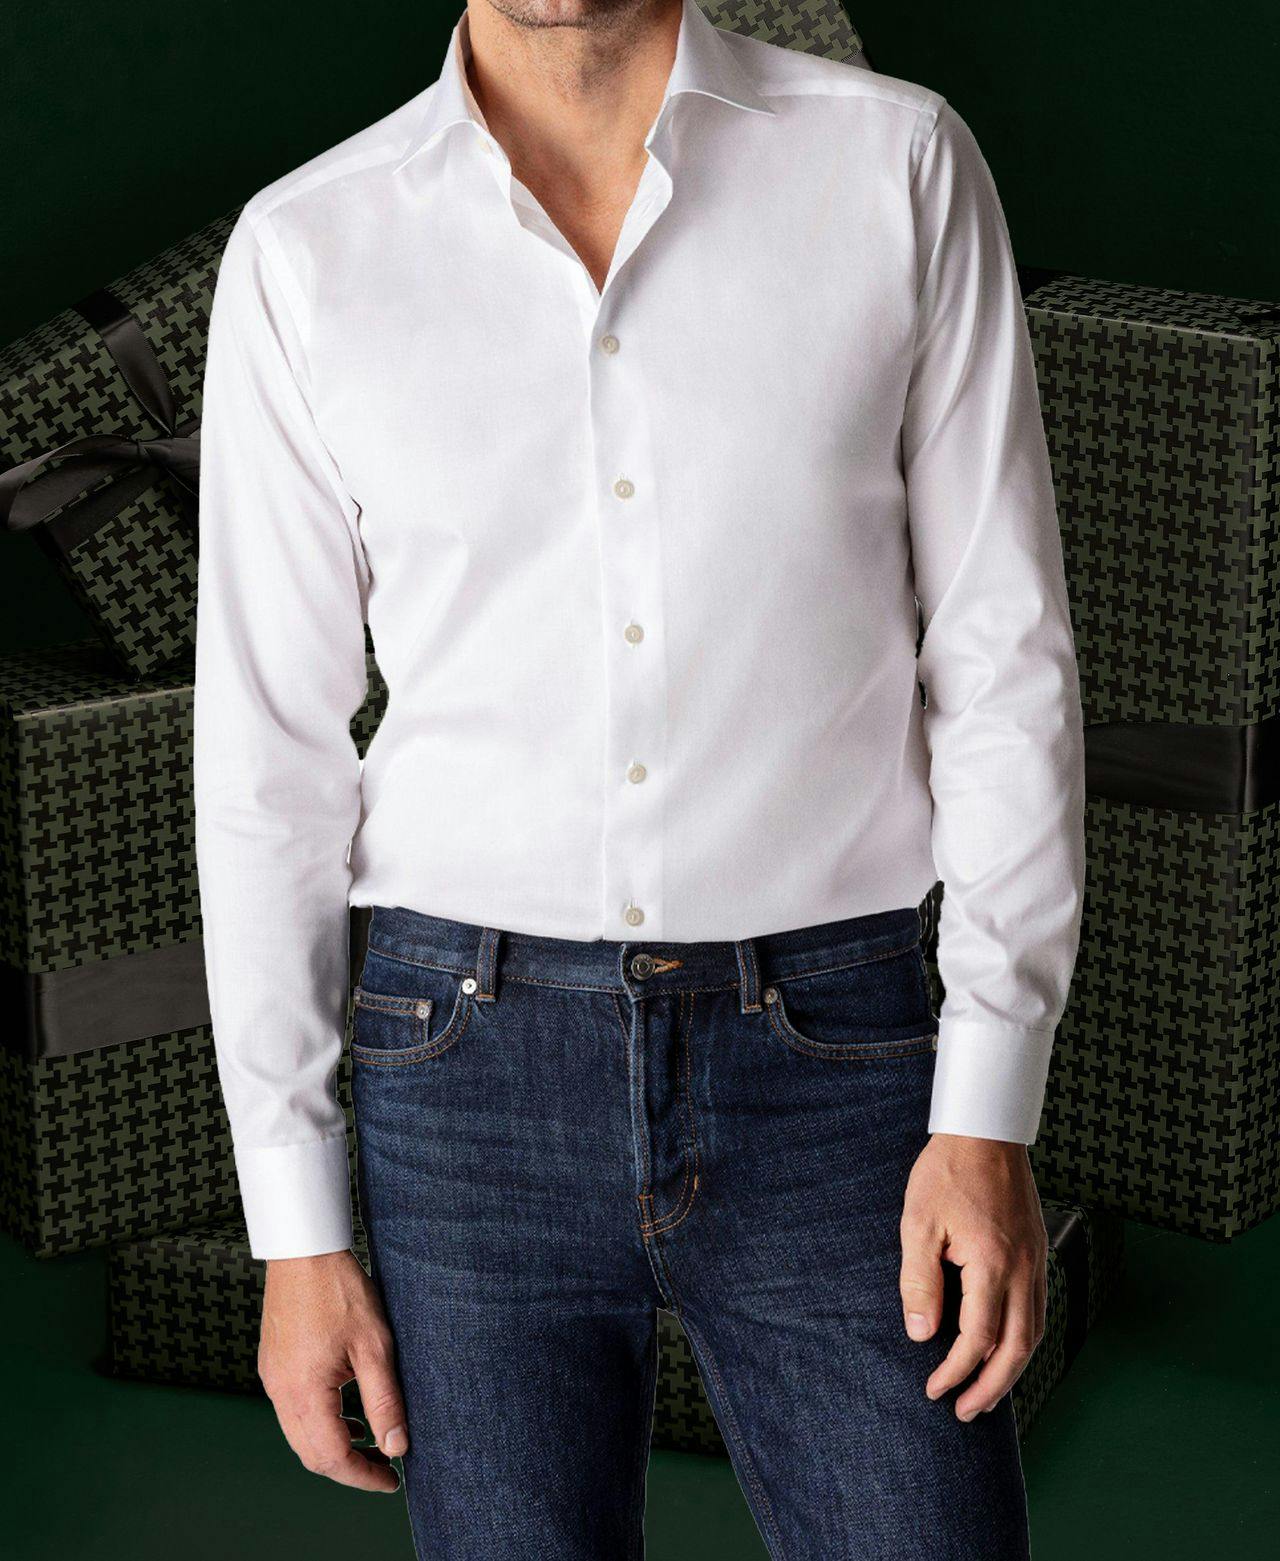 Male model showcases white shirt and blue jeans against dark green background